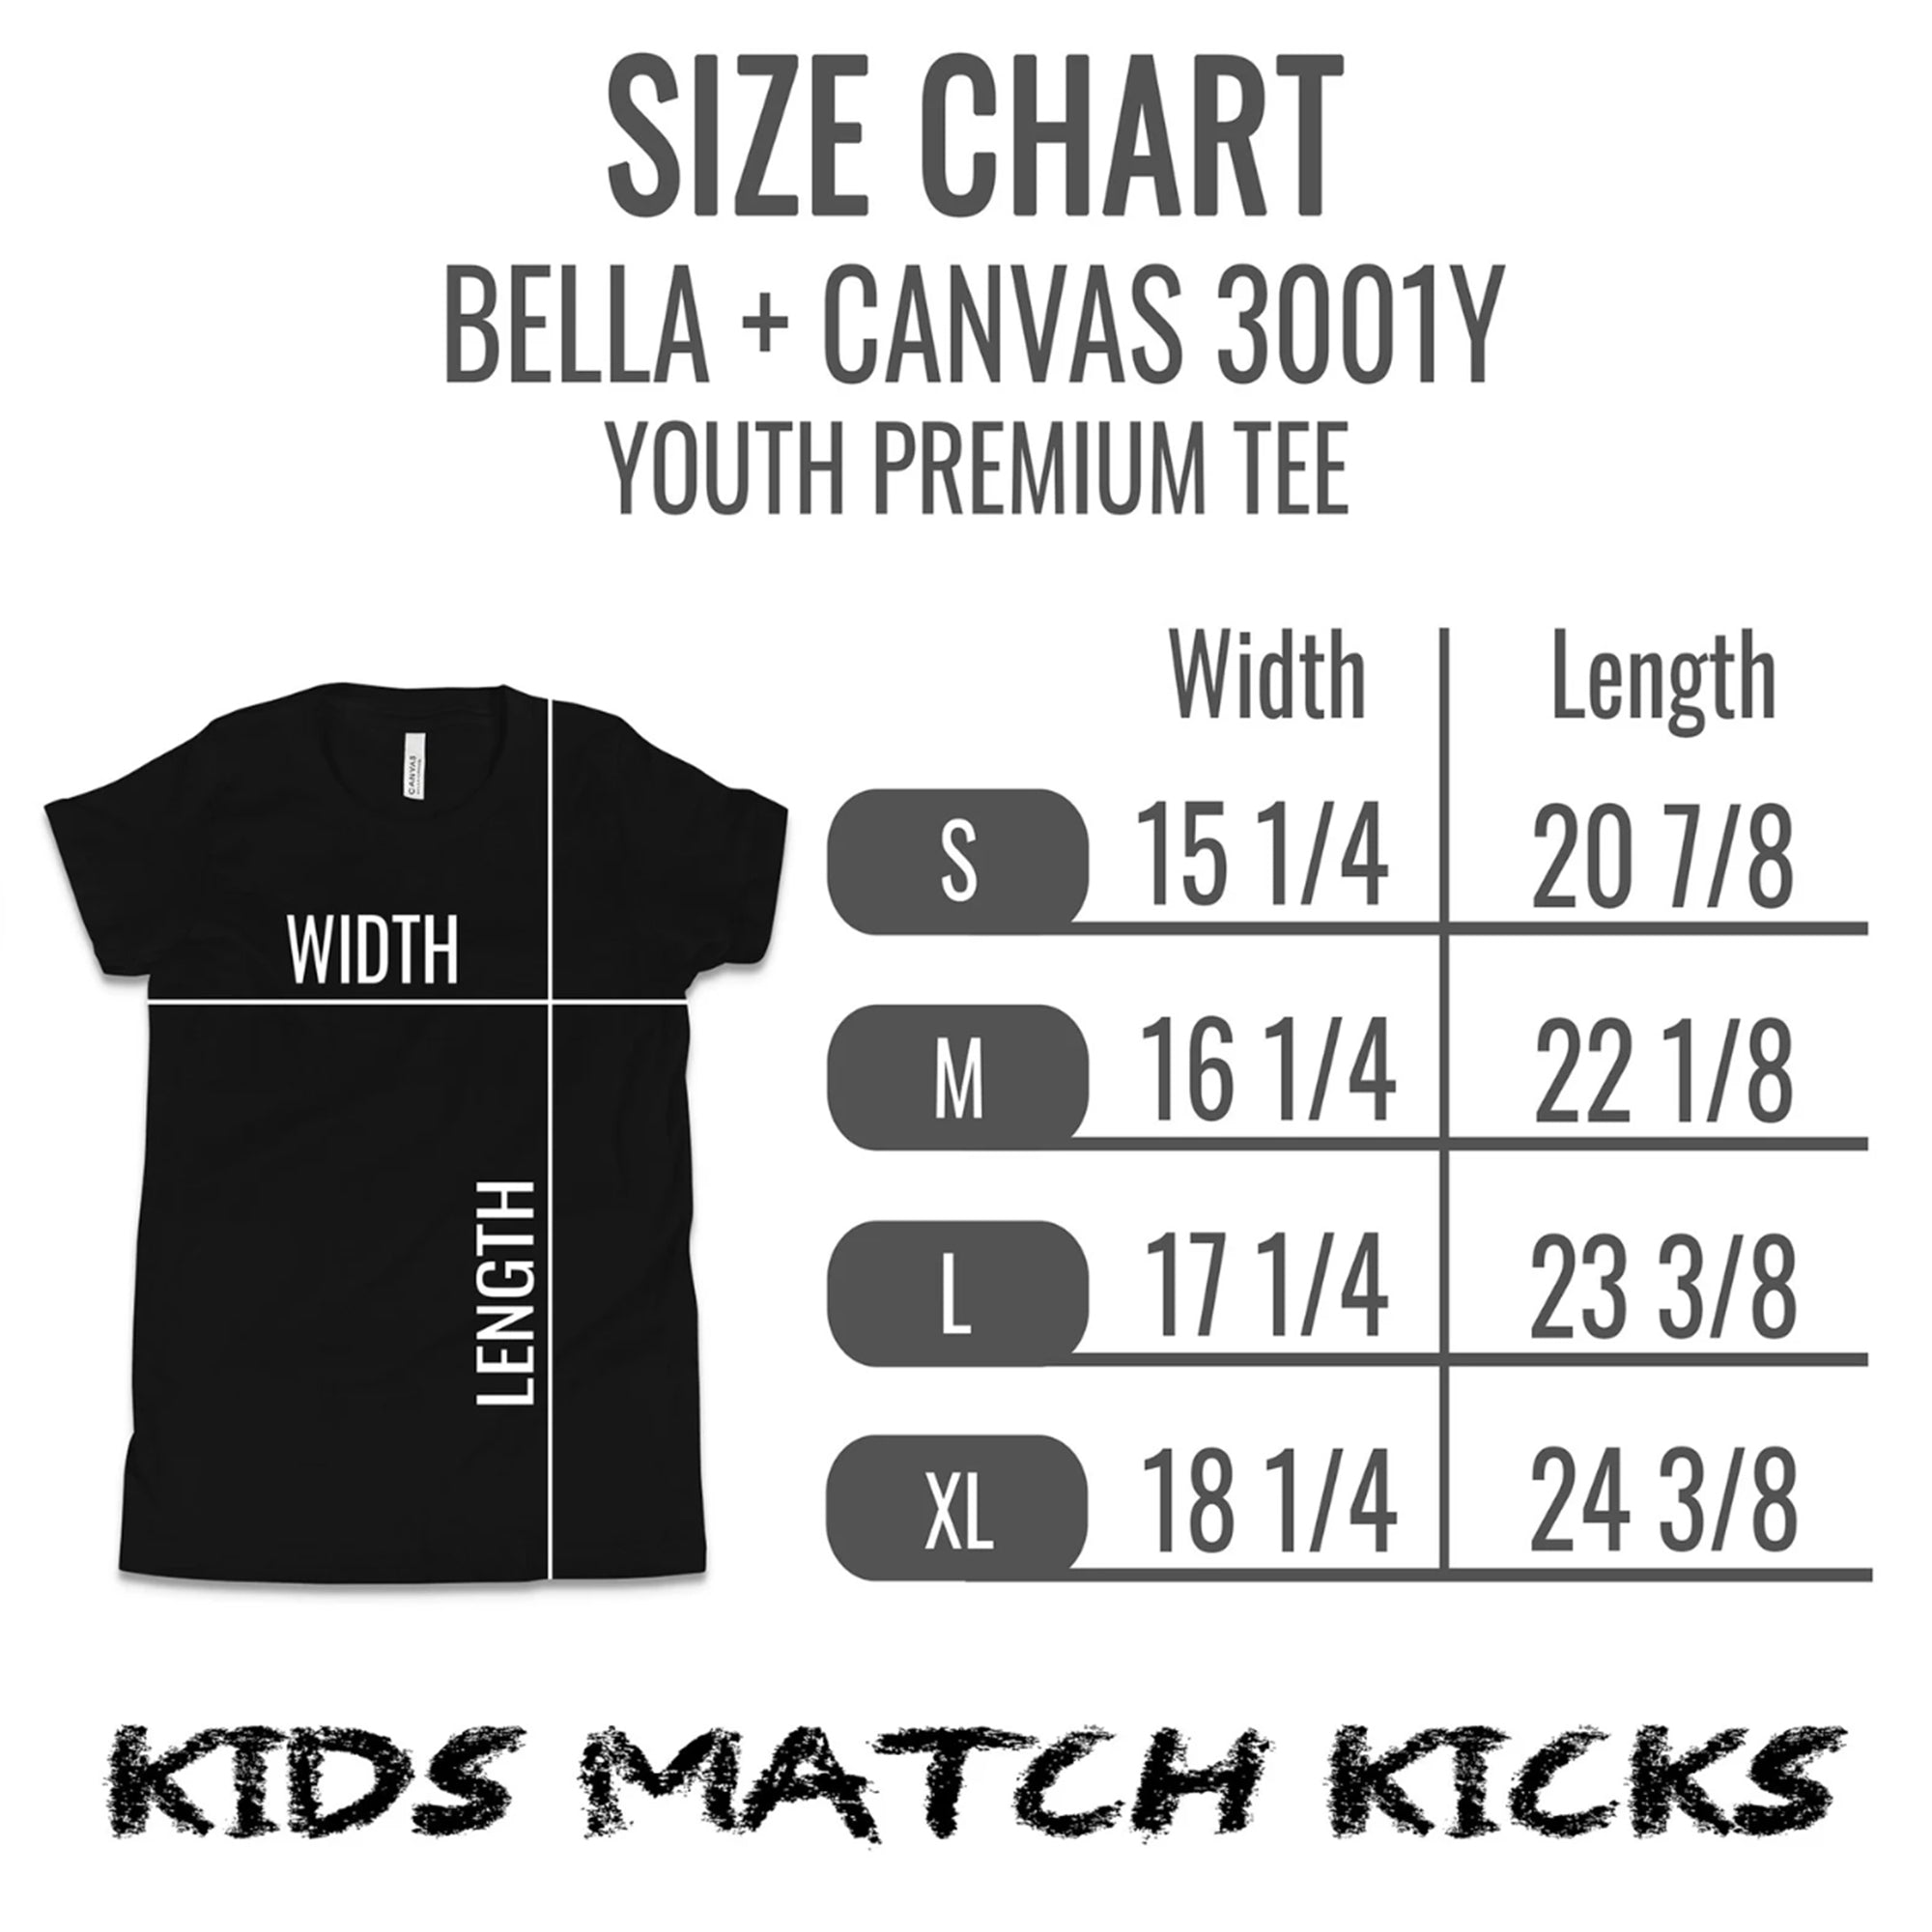 size chart for kids Rugged Rabbit Shirt AJ 1s Mid Gym Red Black photo